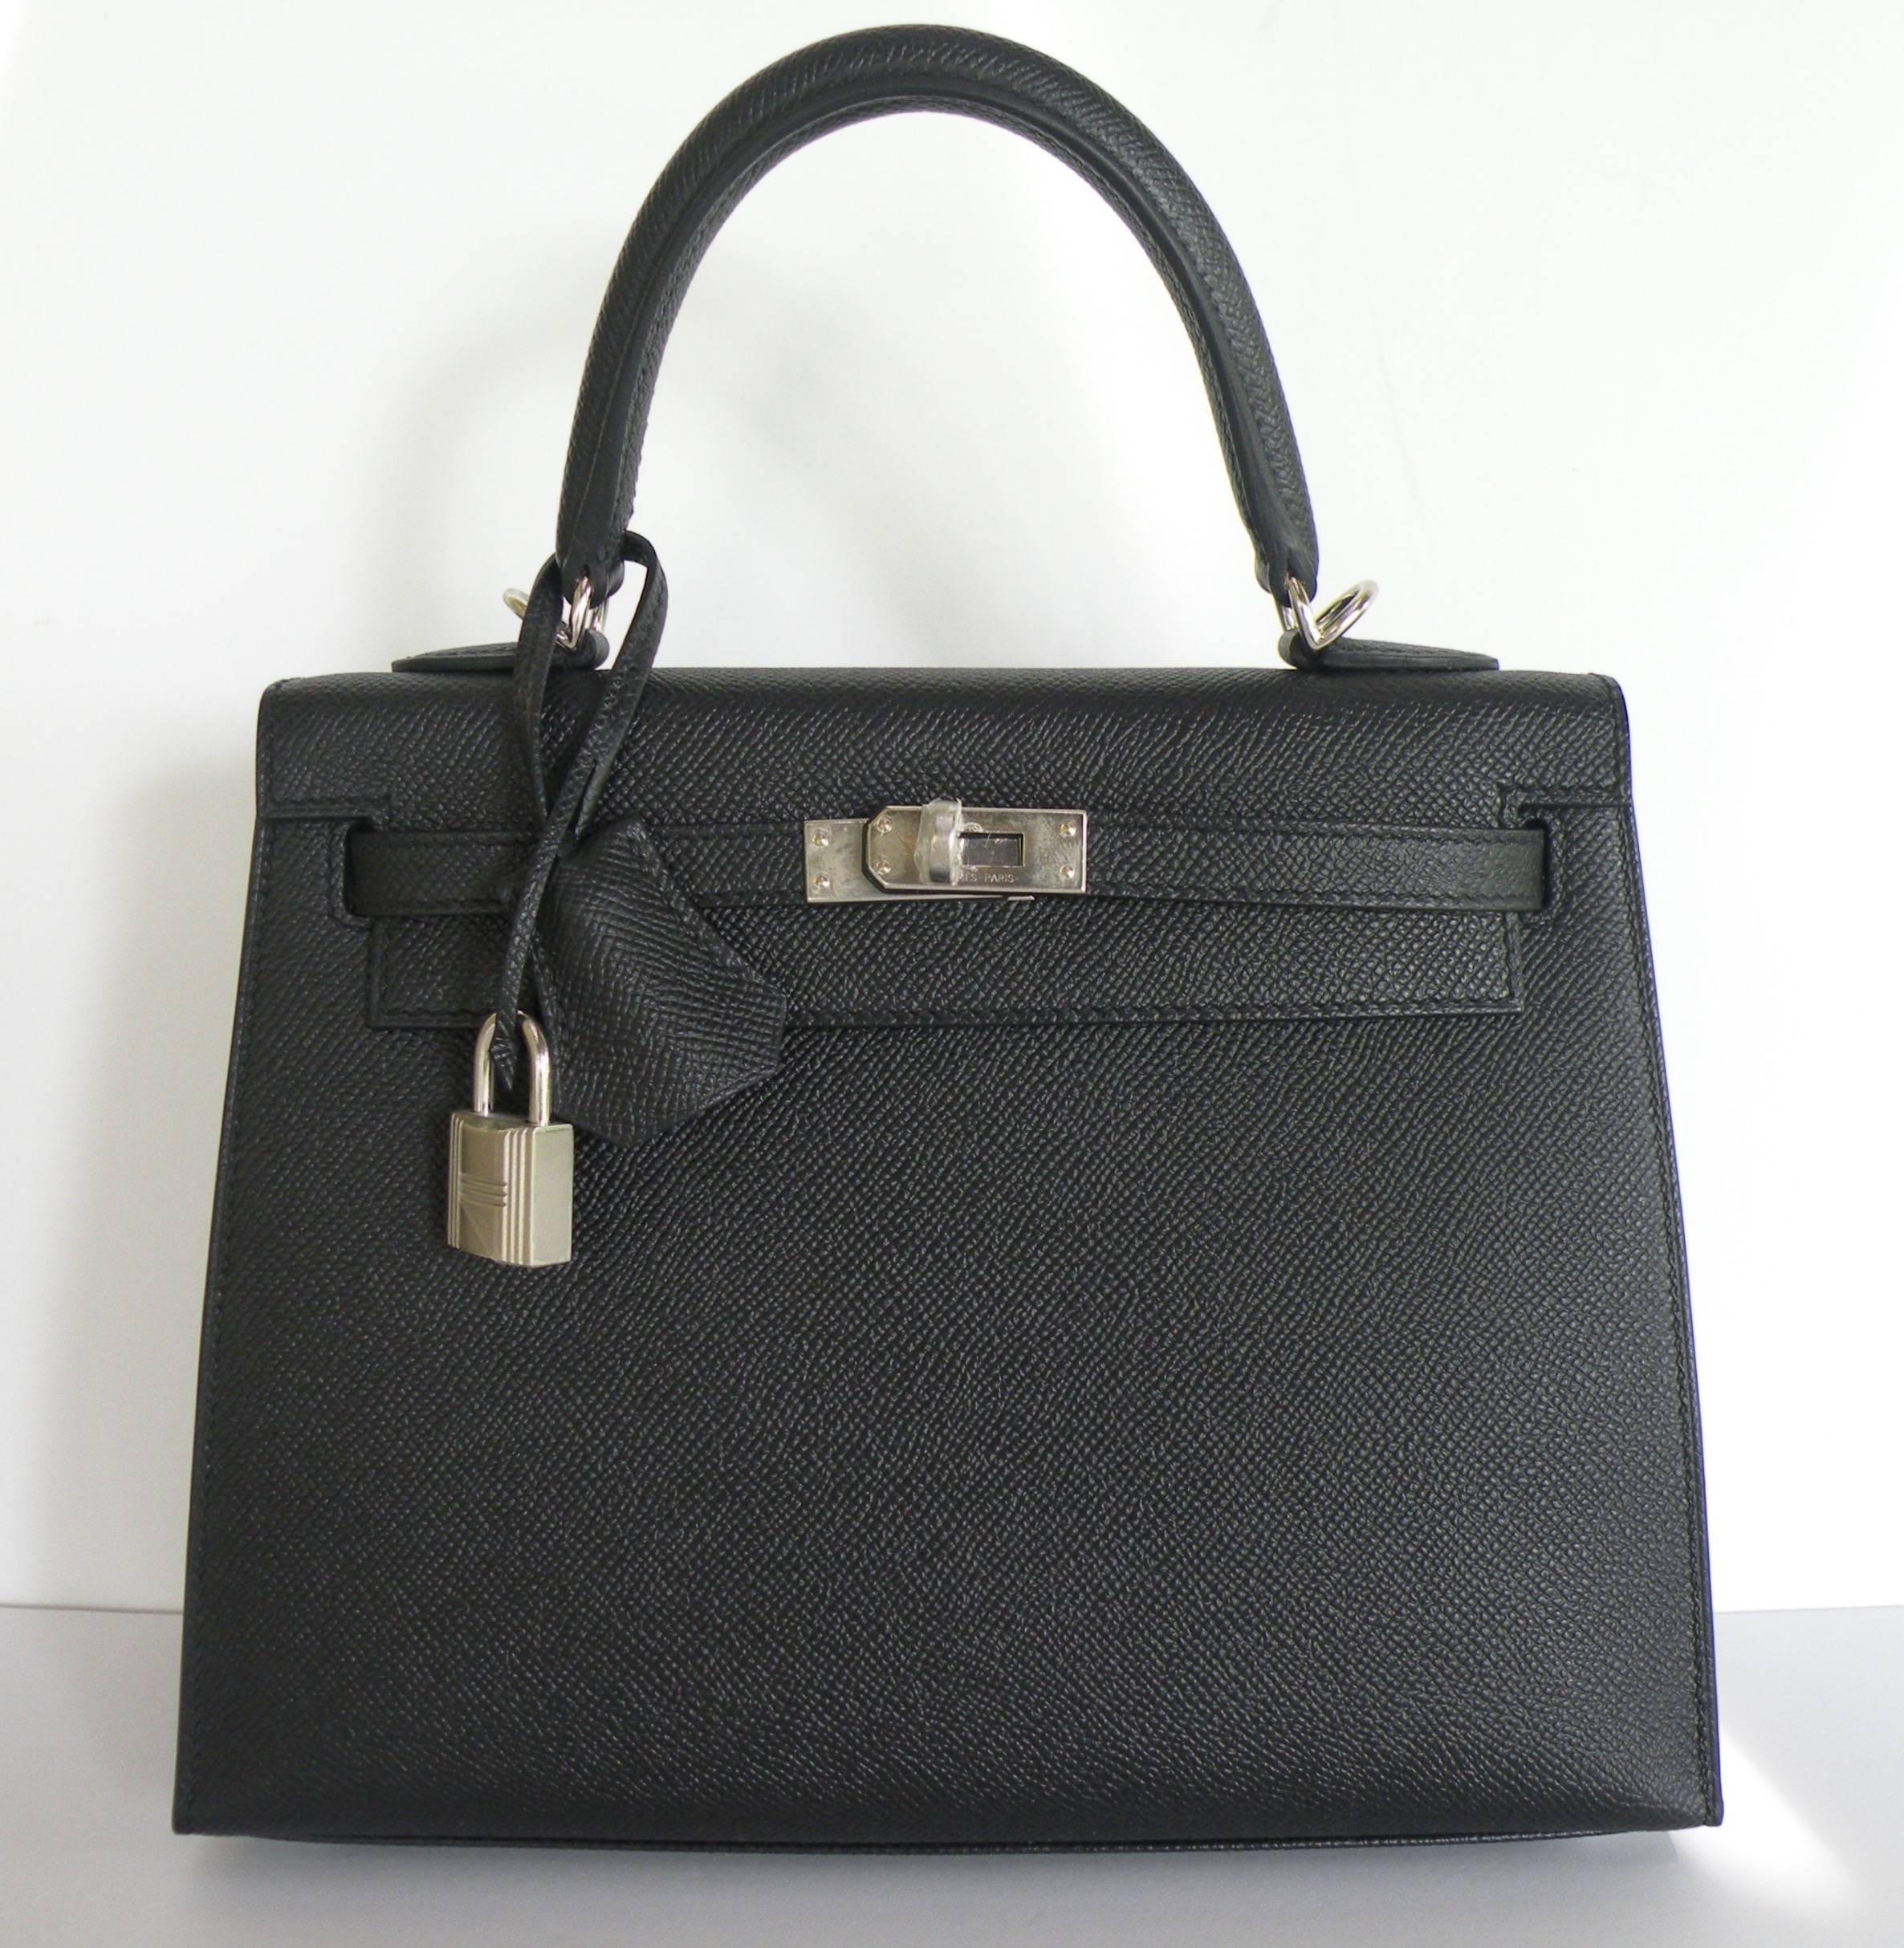 Hermes 25cm Black Kelly Epsom Sellier Palladium Bag In New Condition For Sale In West Chester, PA